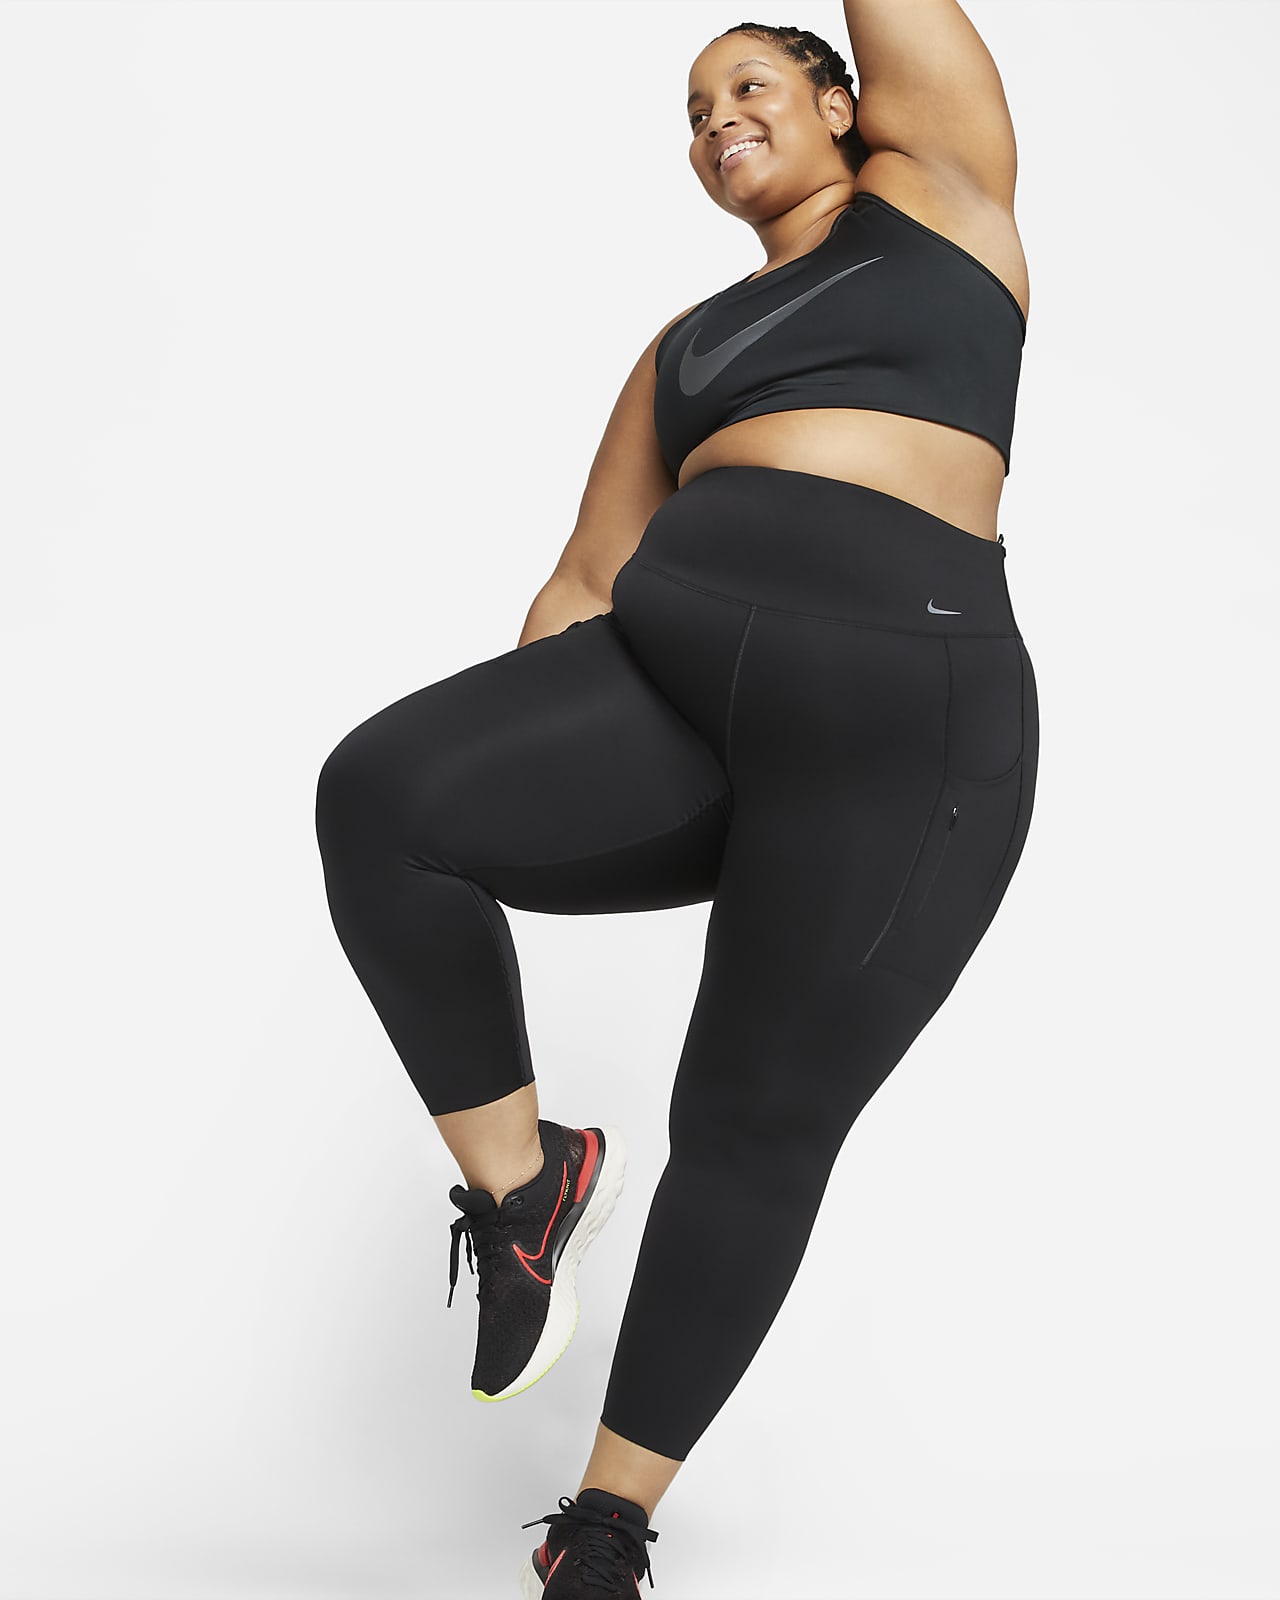 Discover more than 144 womens plus size leggings best